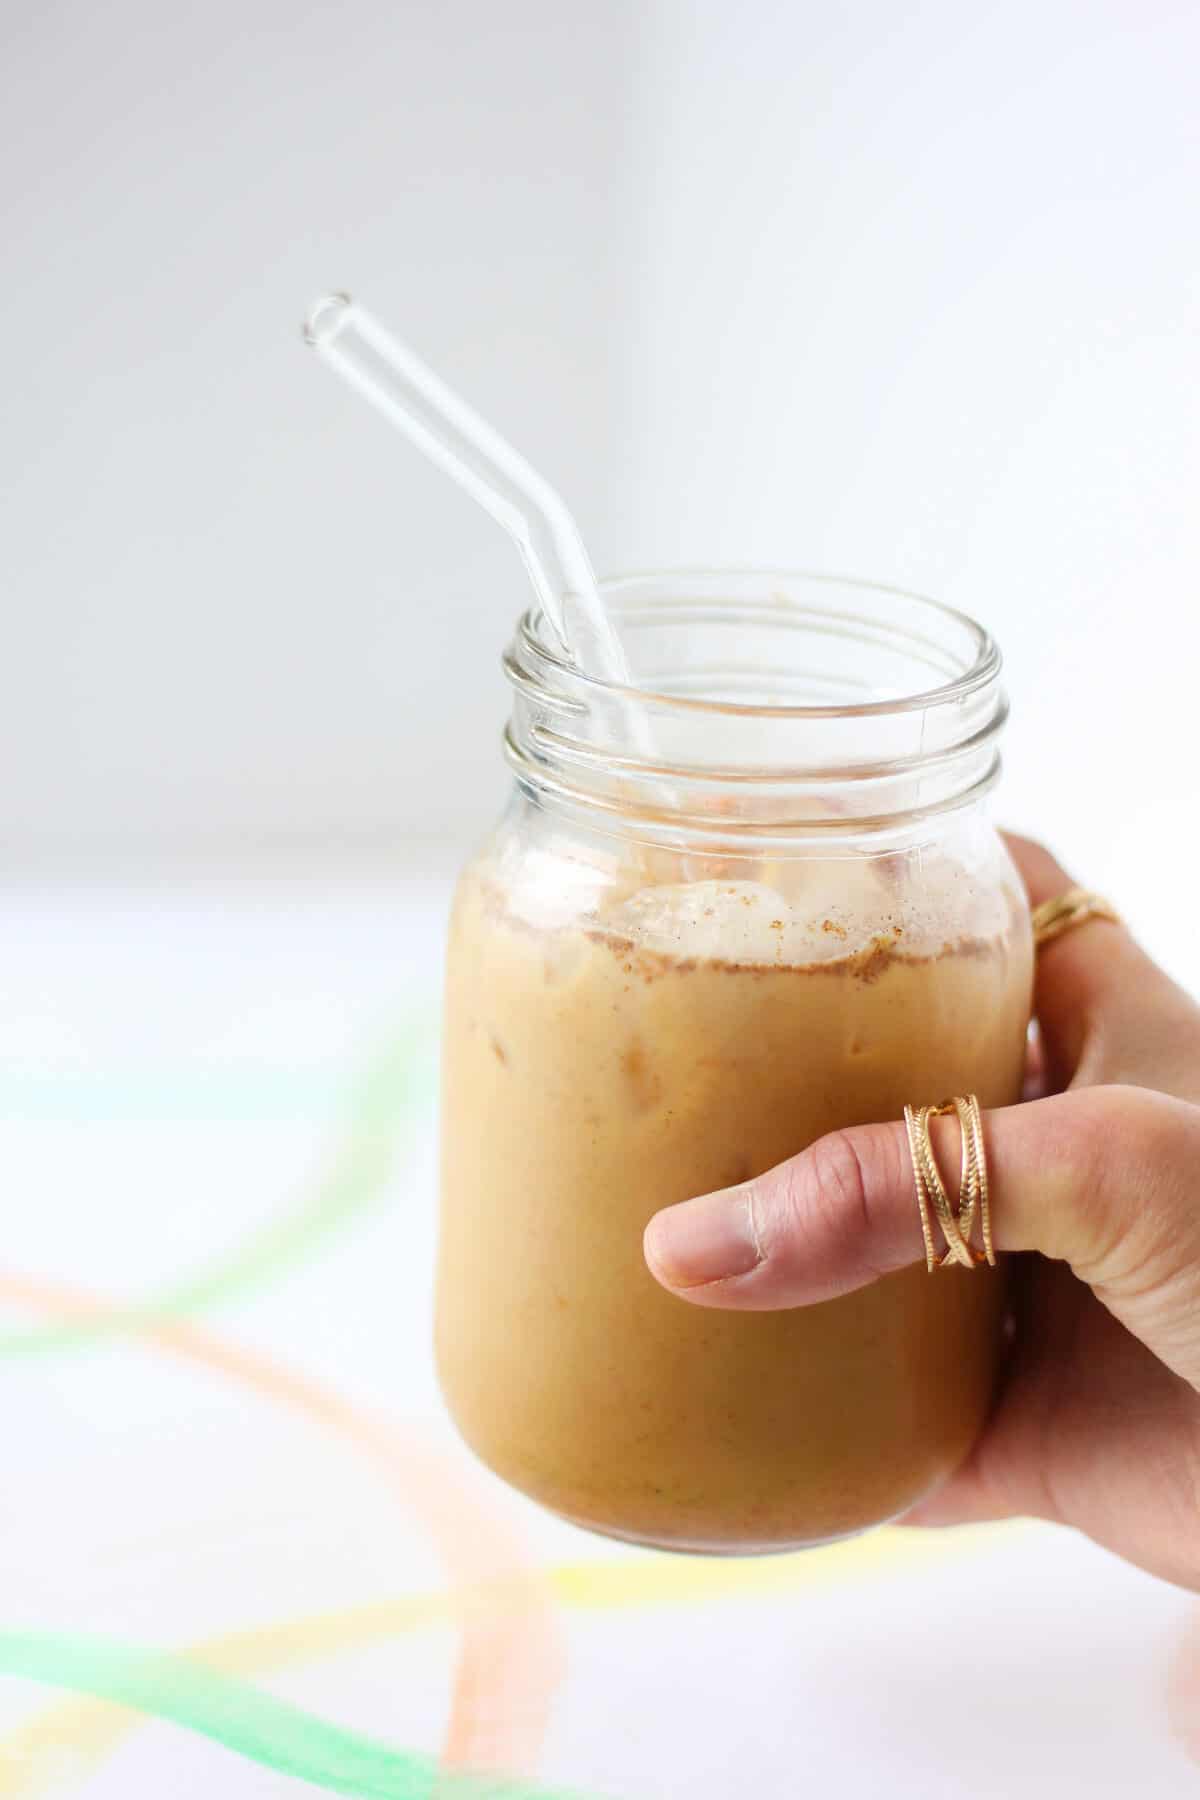 Hand holding a clear jar filled with ice and creamy coffee with a clear glass straw.